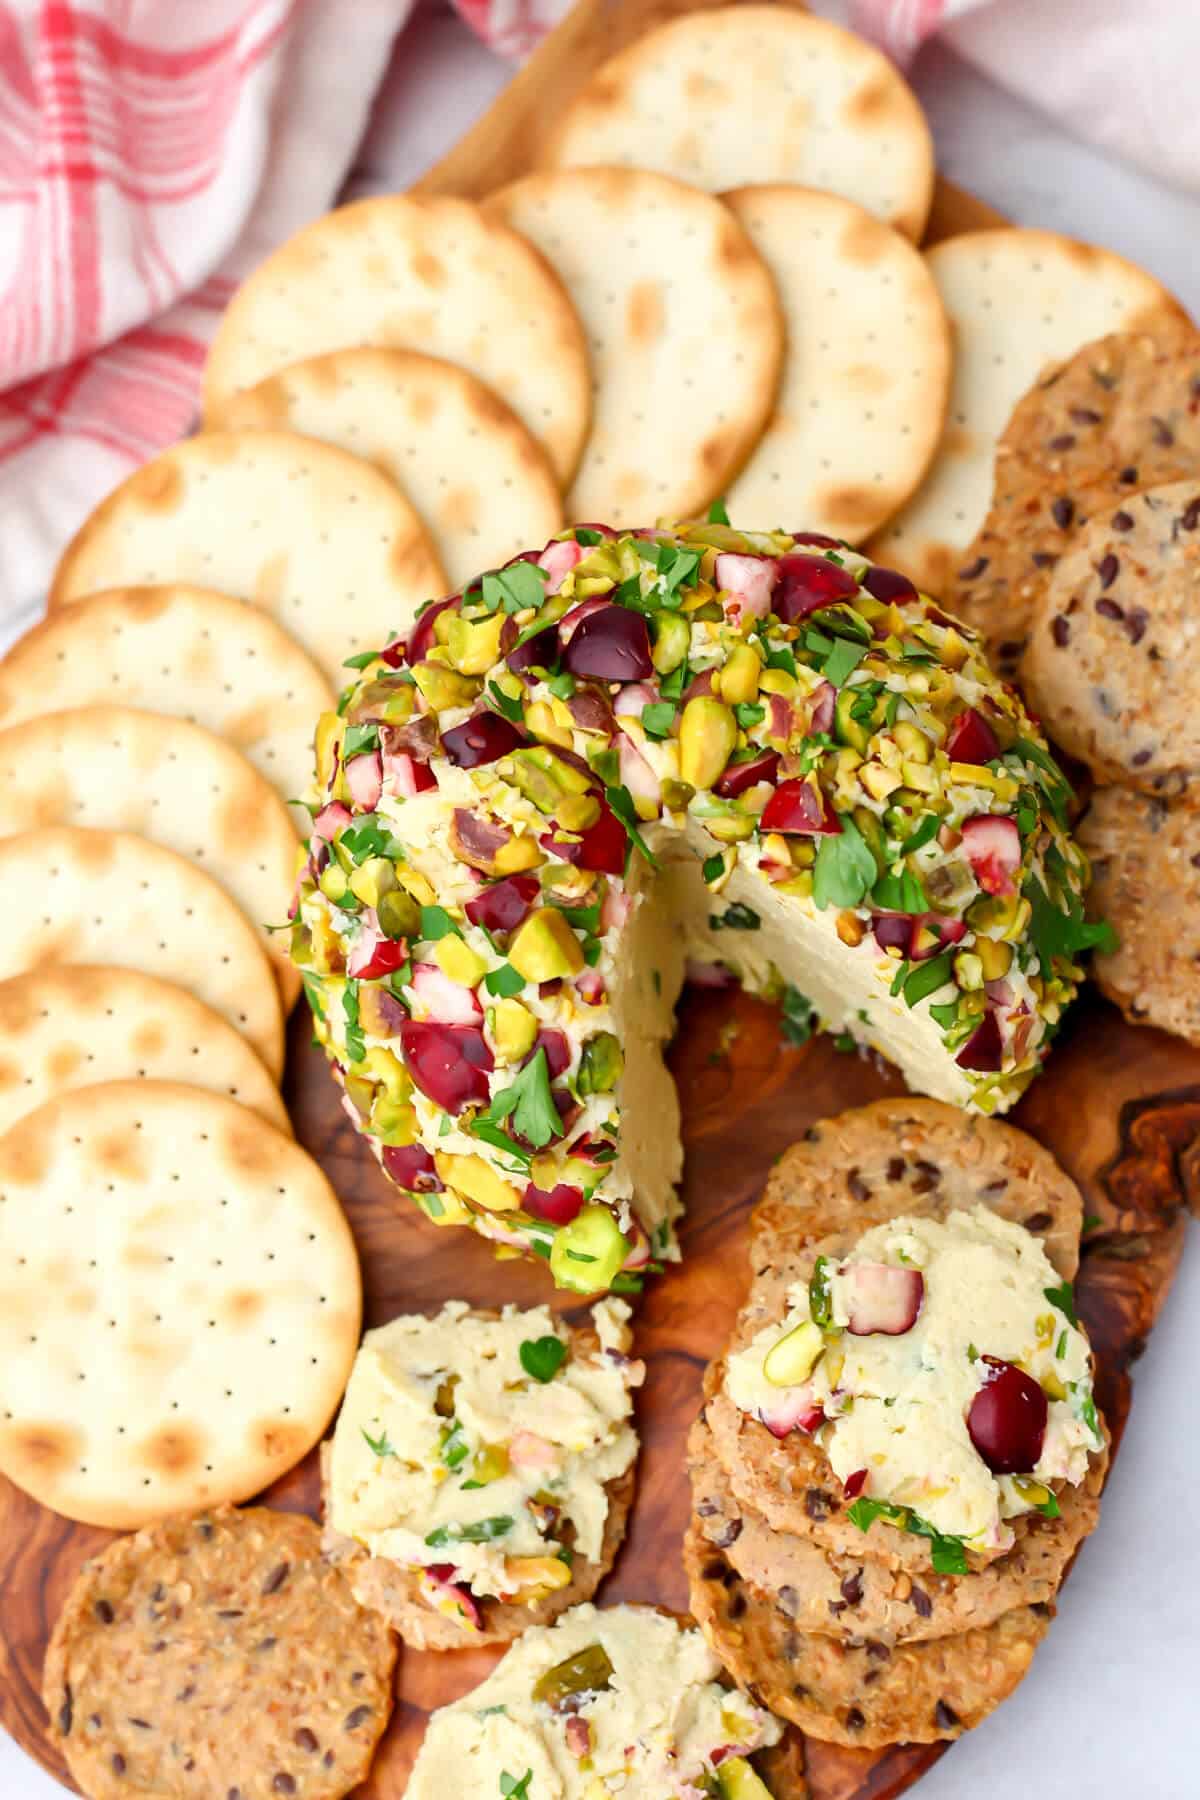 A top view of a tofu cheese ball with herbs served with crackers.